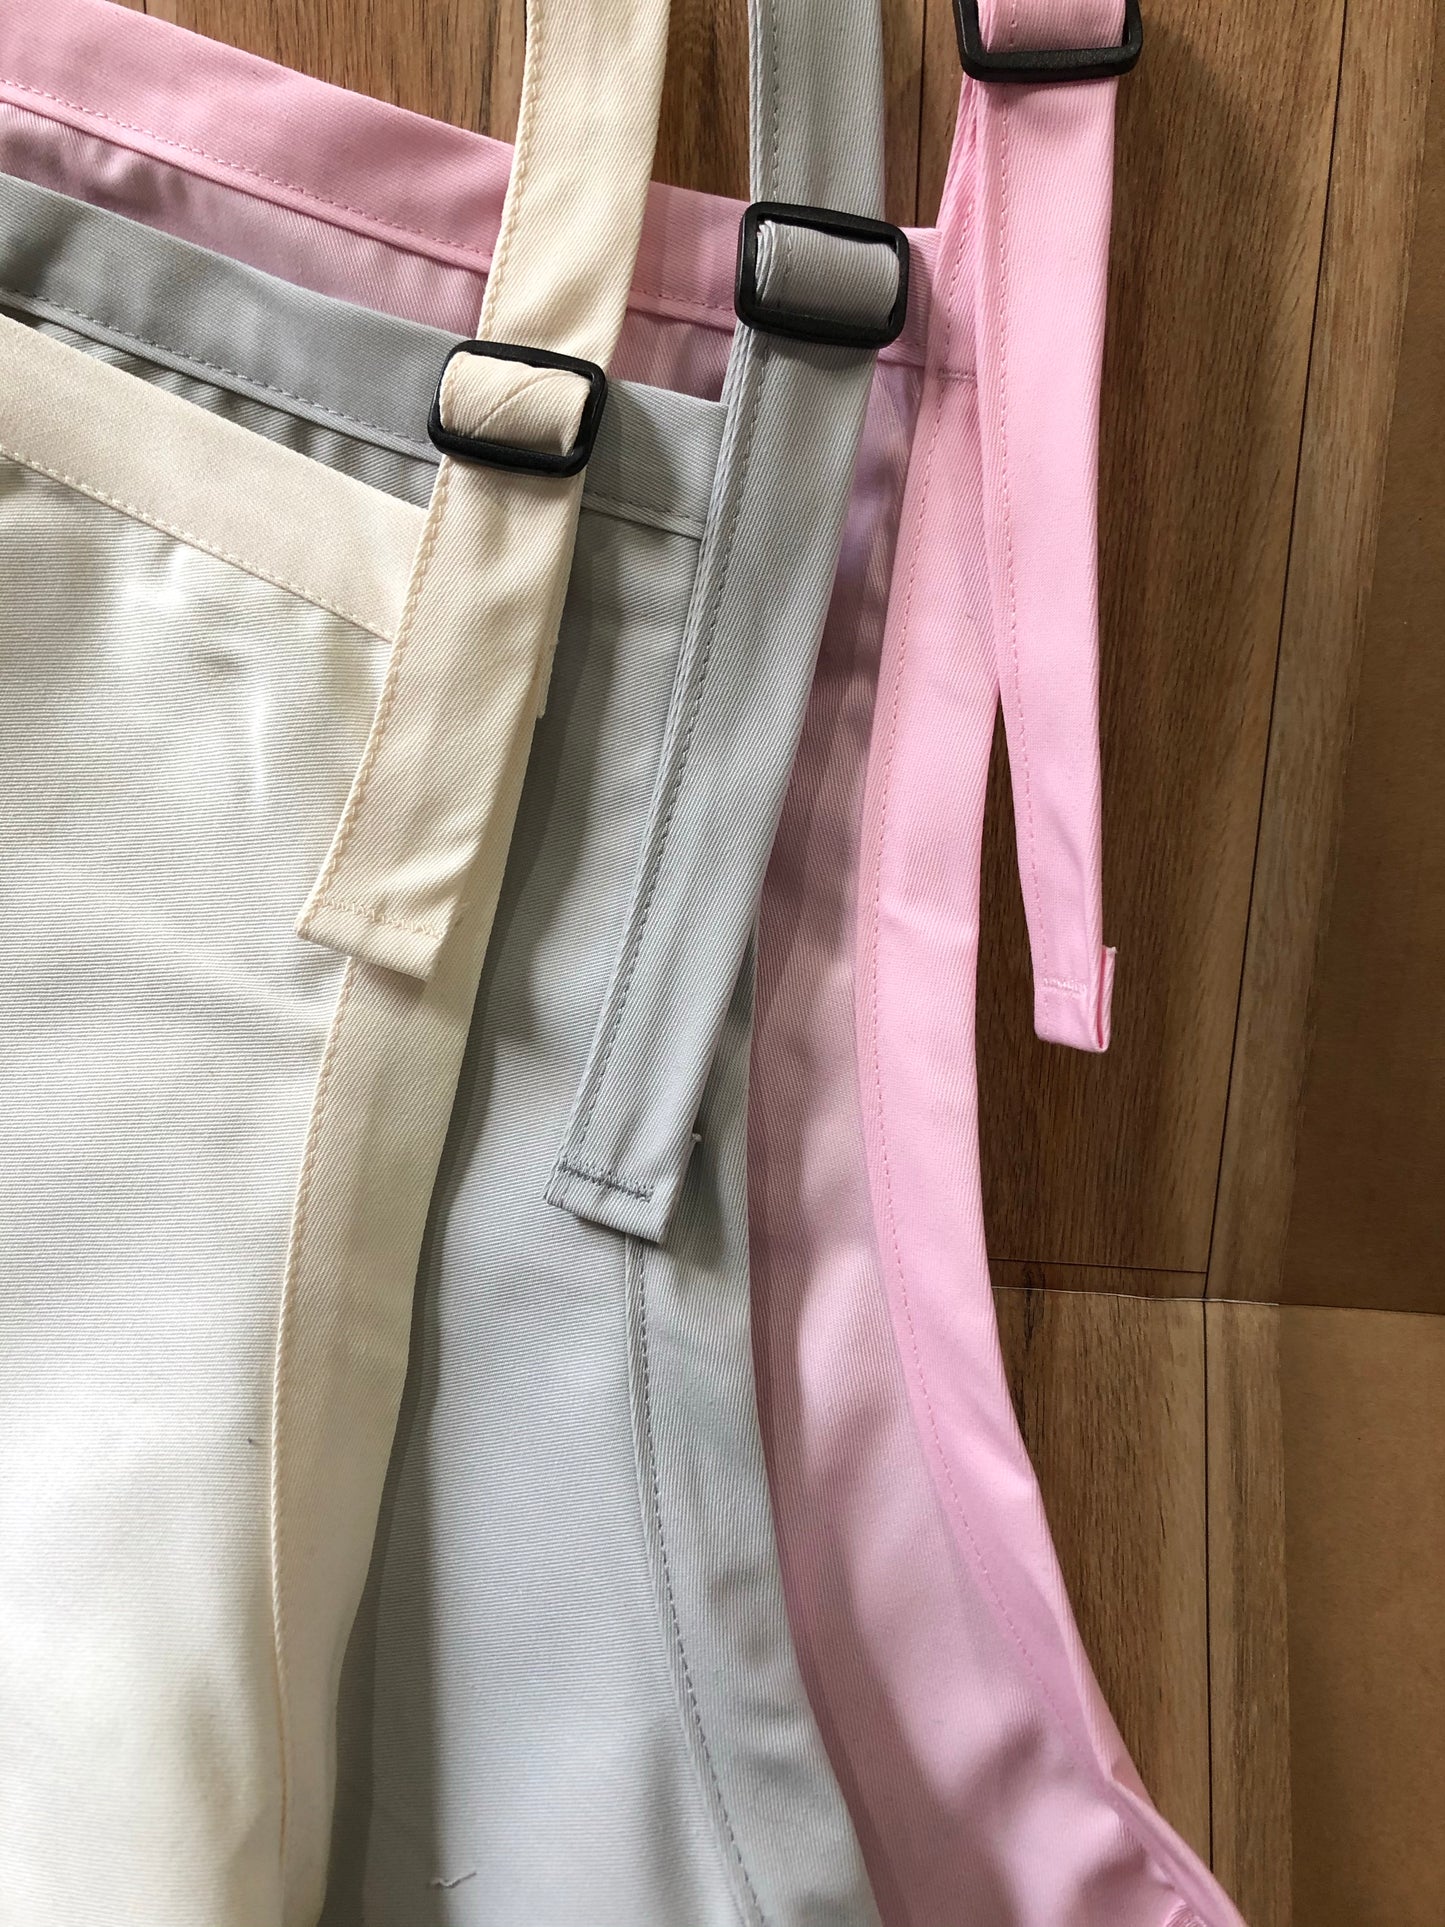 Solid Color Apron with Pockets, Adjustable Neck